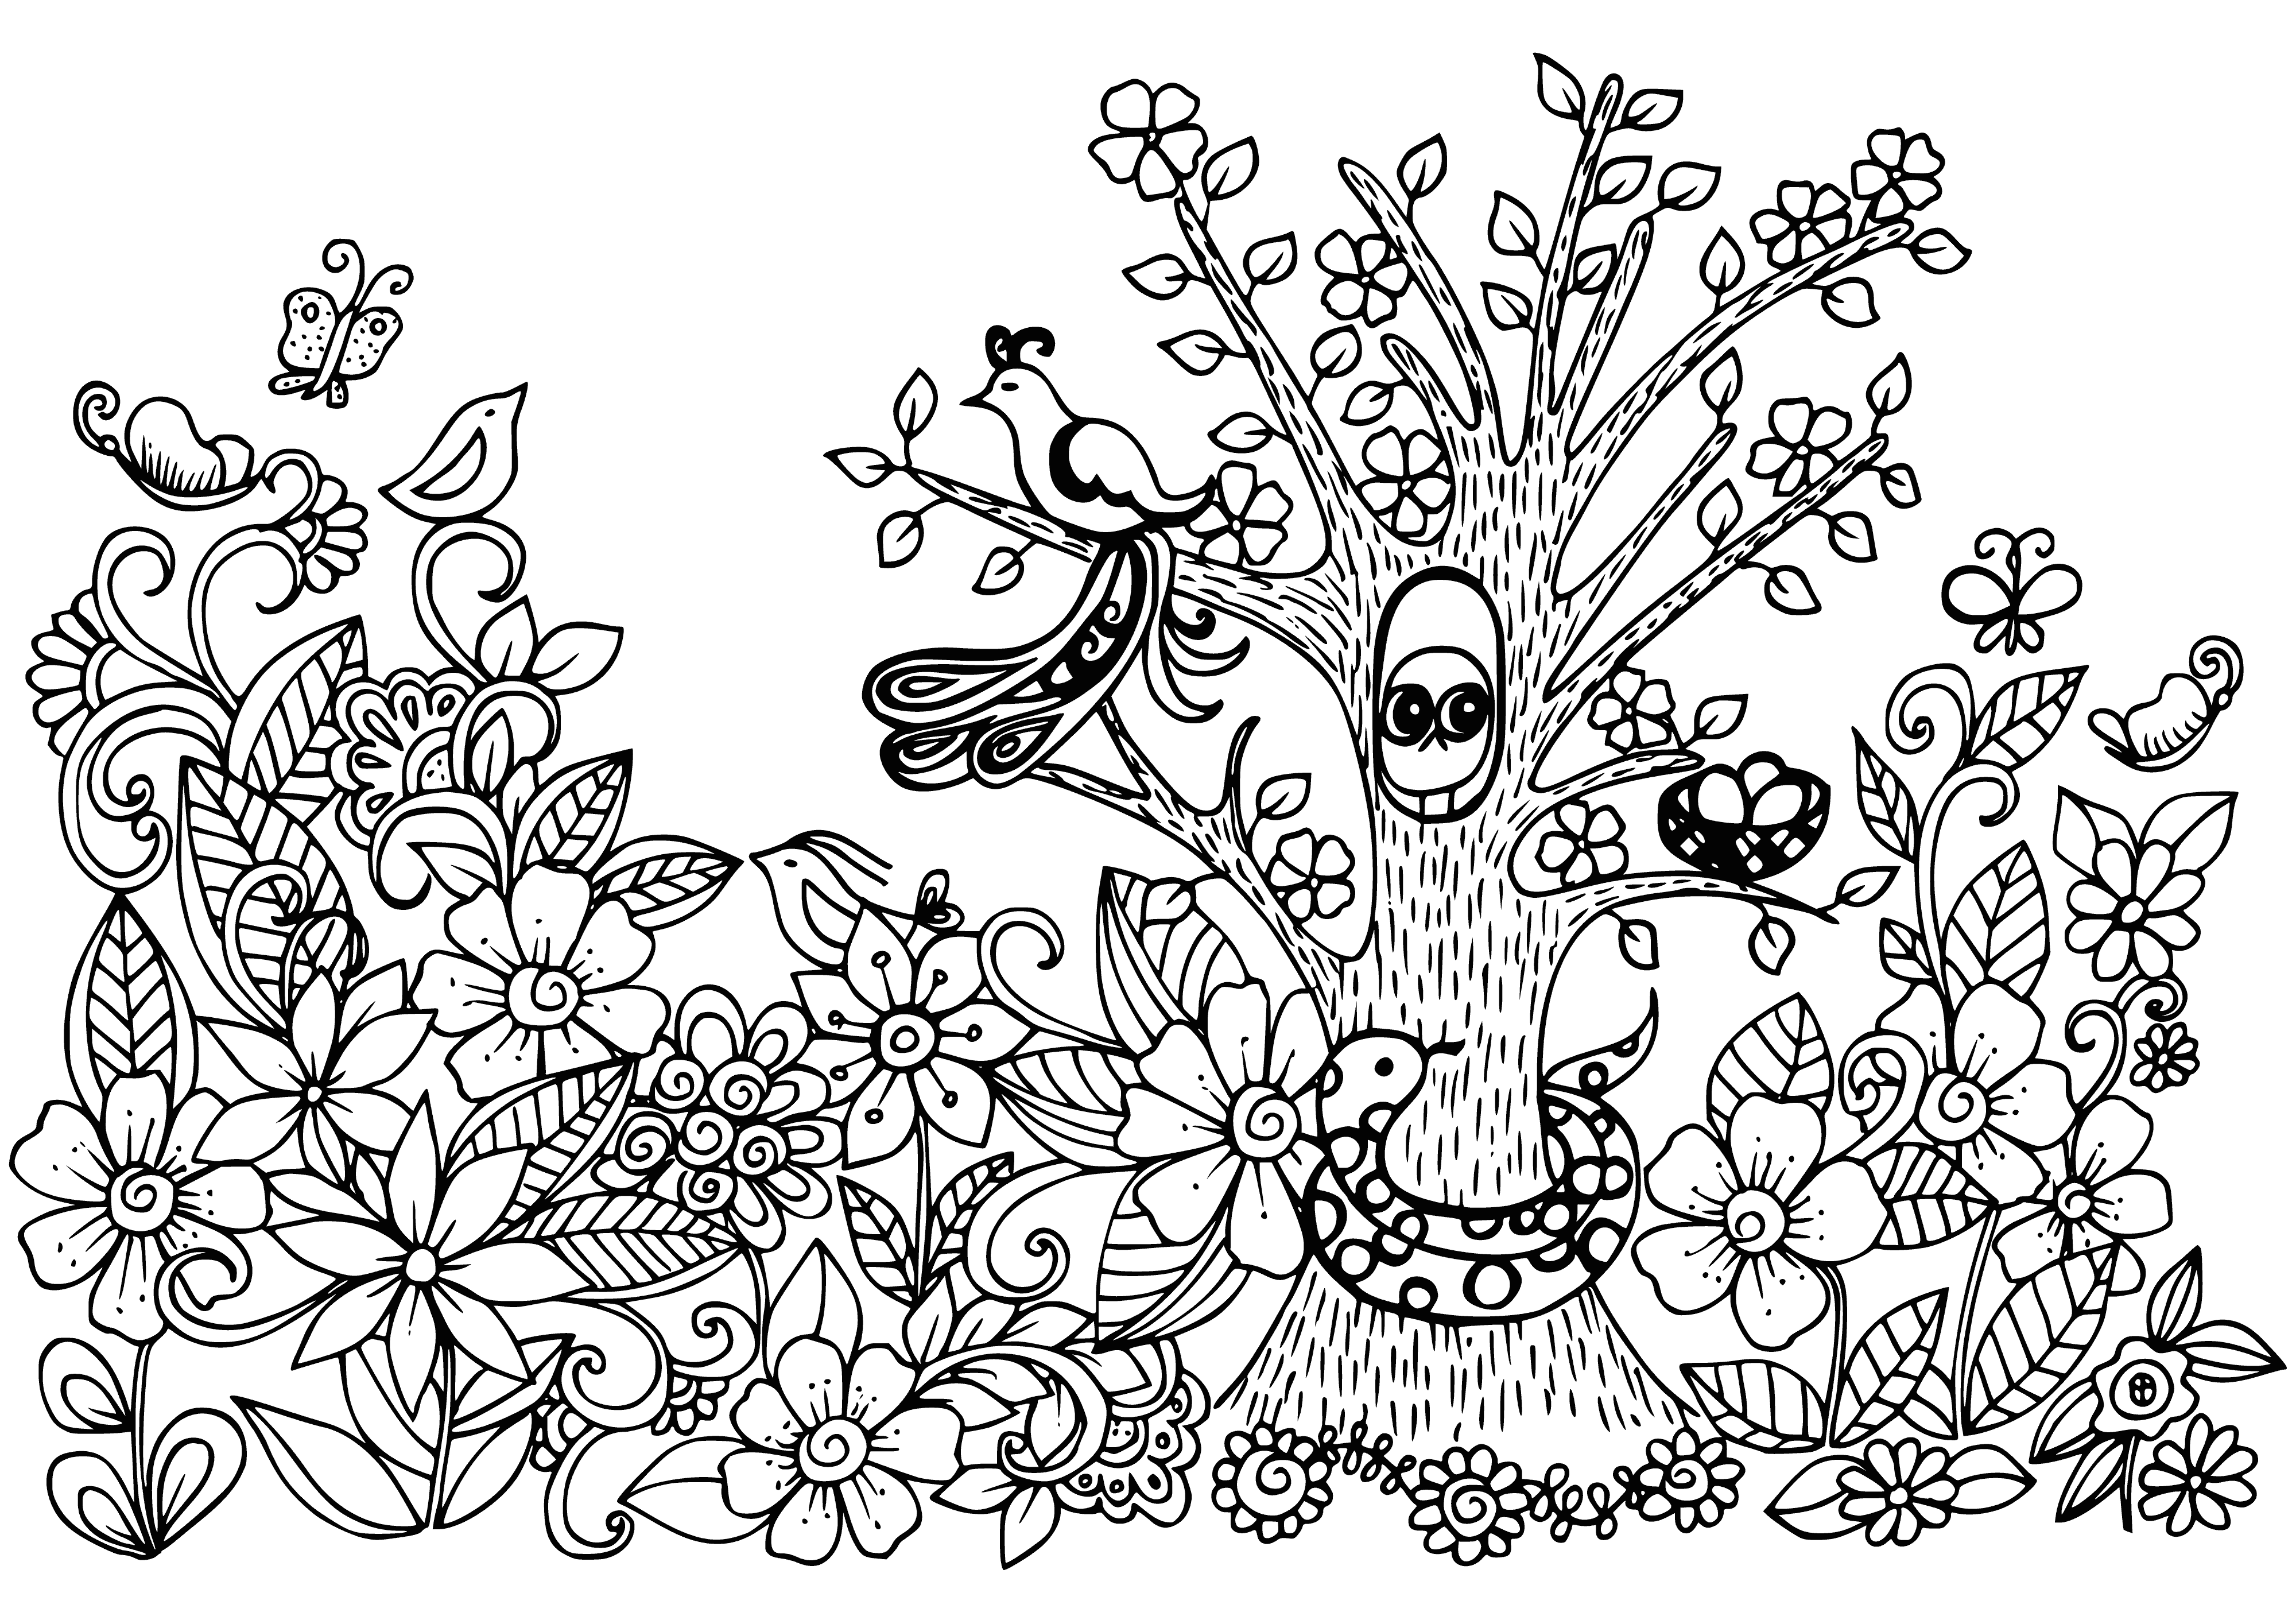 In the woods coloring page